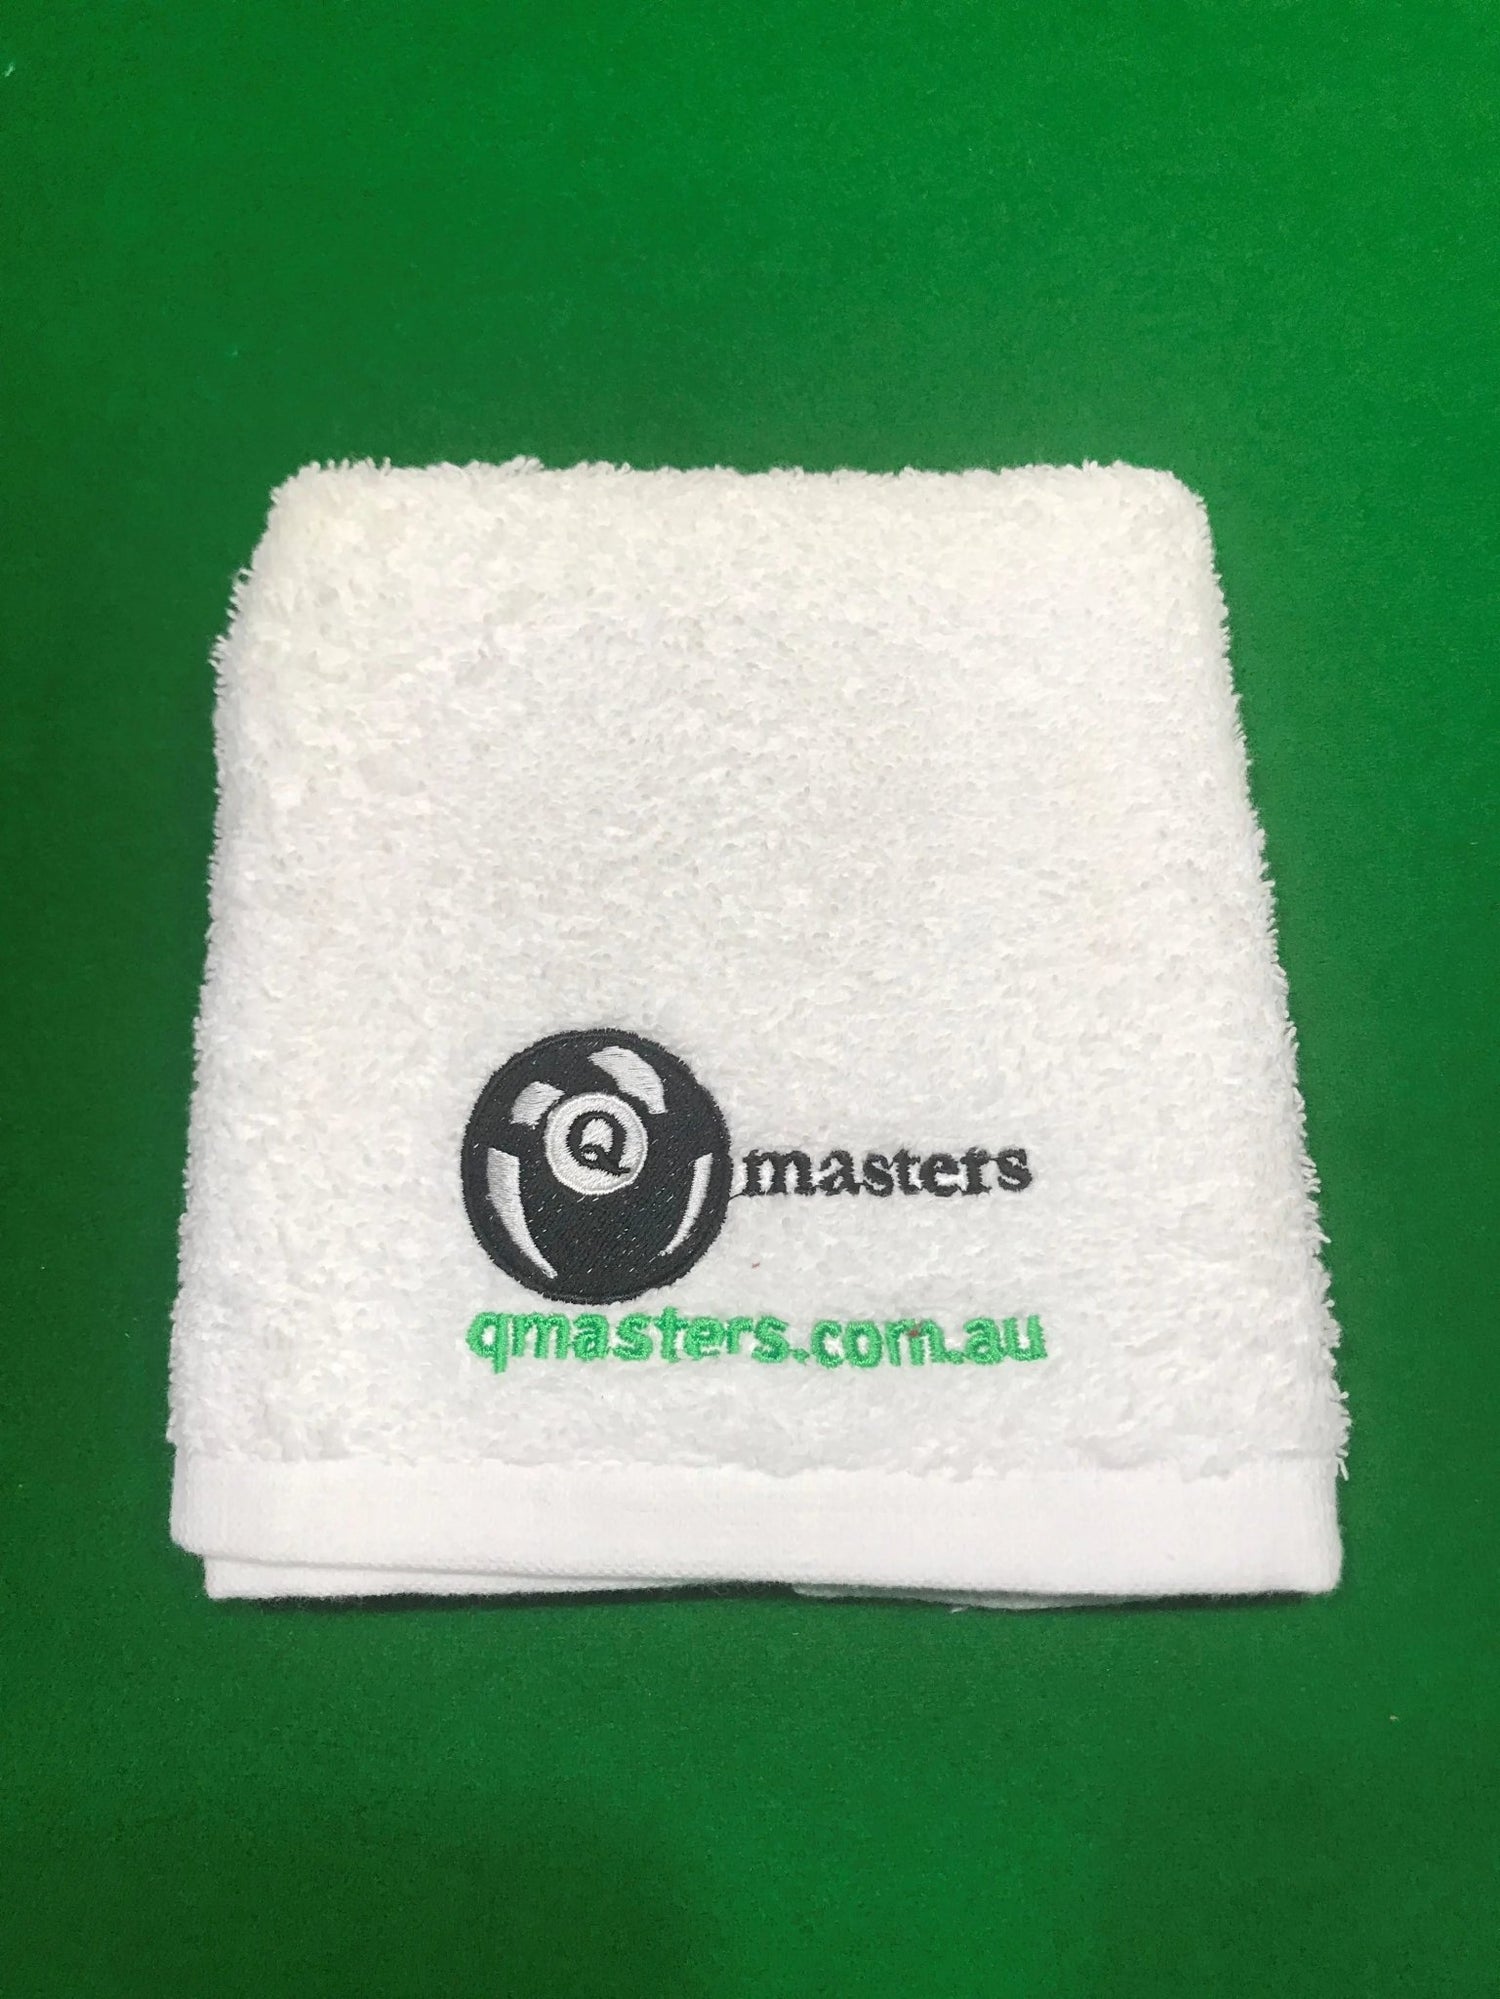 Q-Masters Embroidered Cue Sport Towel White - Q-Masters